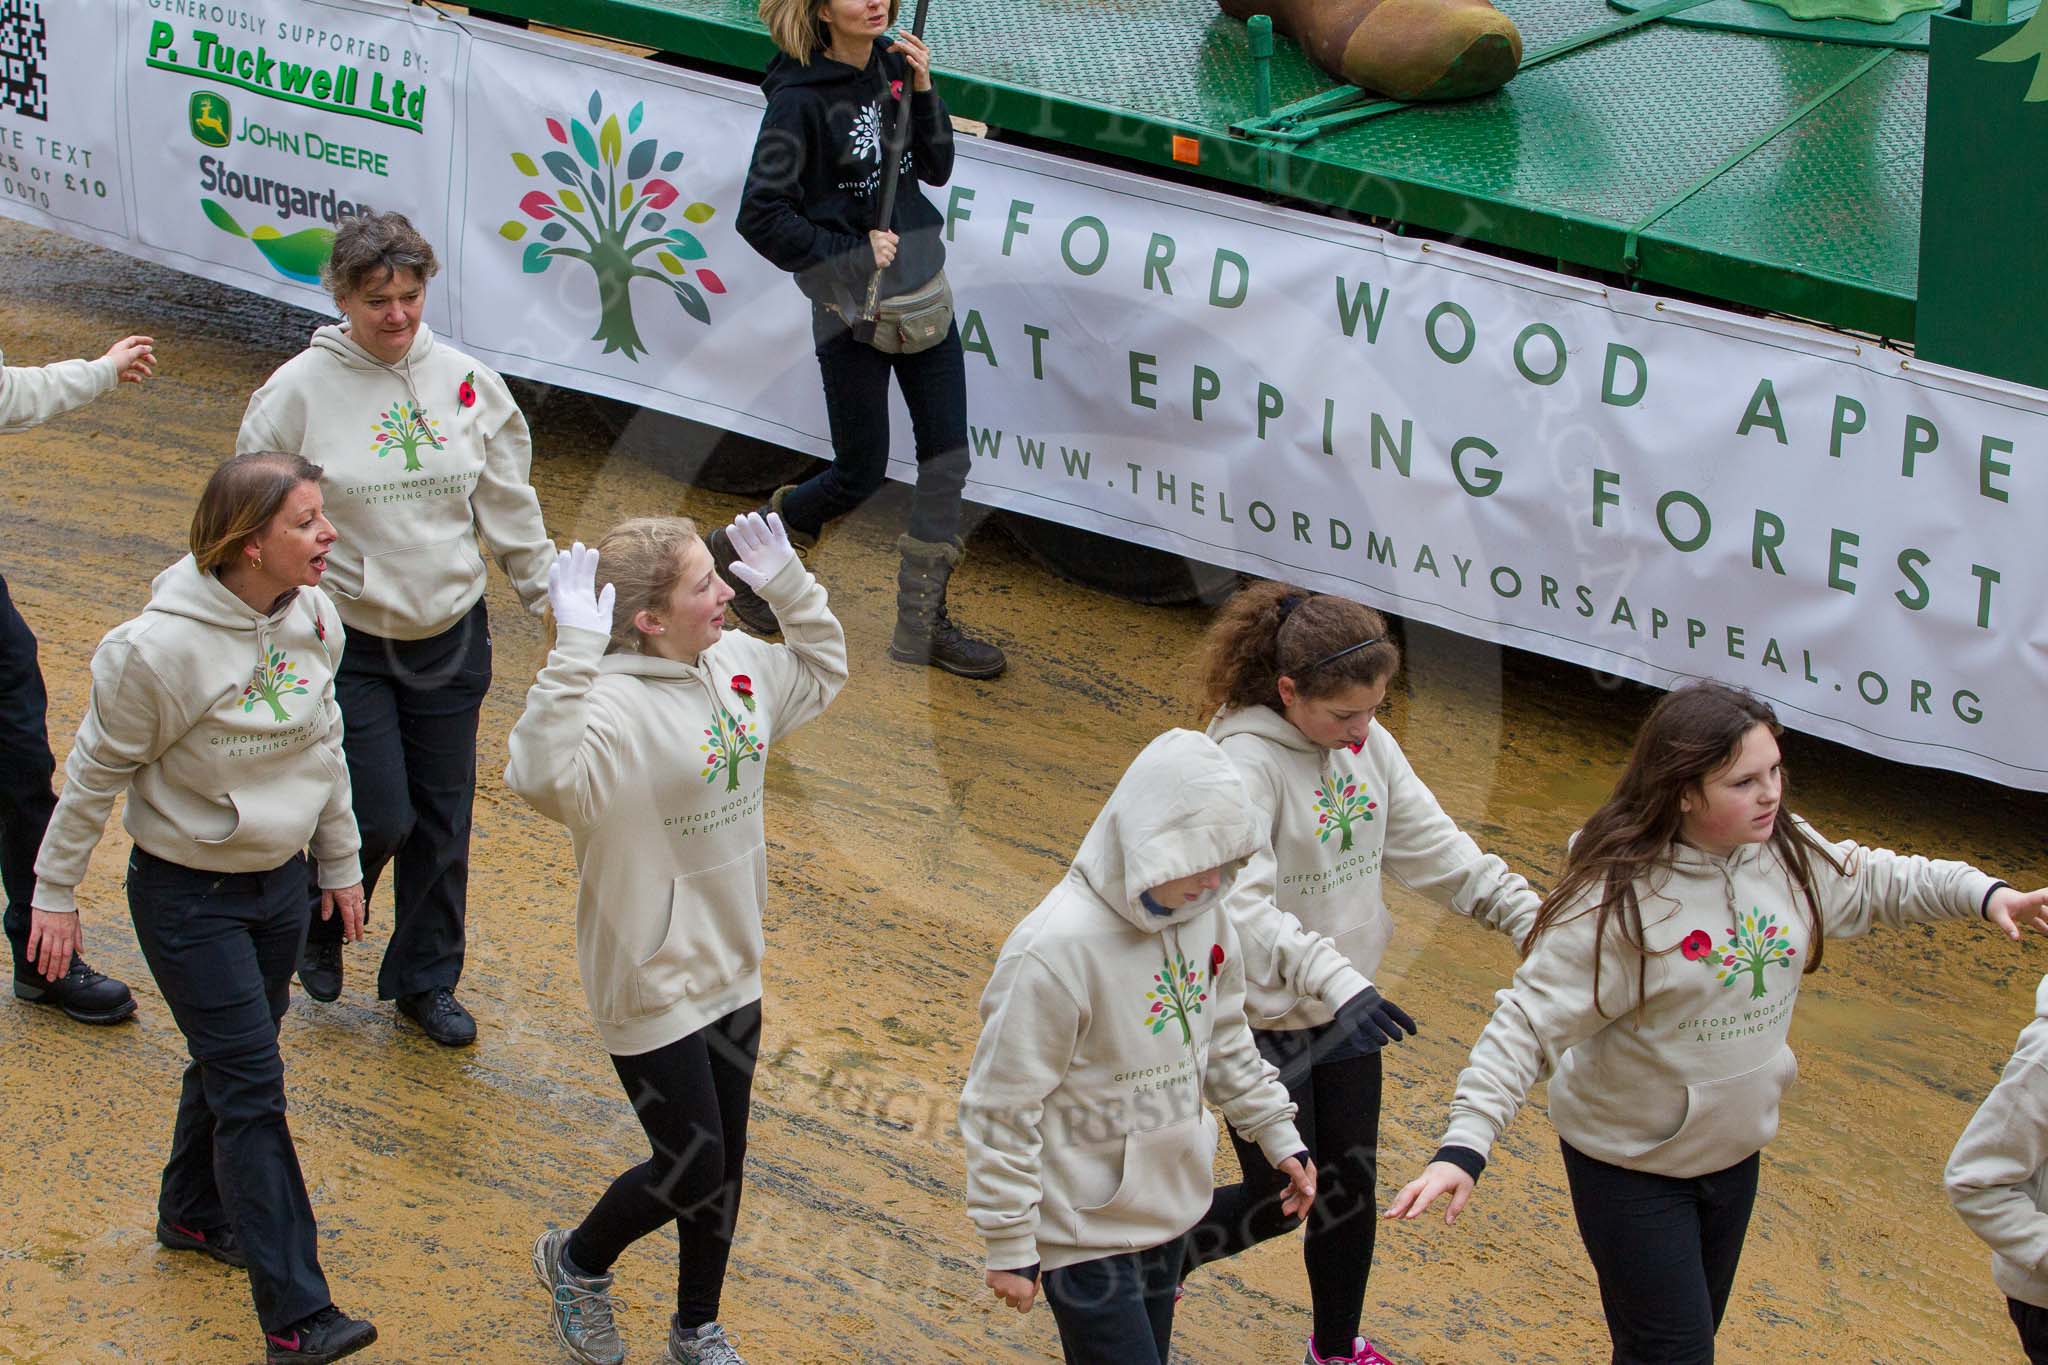 Lord Mayor's Show 2012: Entry 37 - Epping Forest promotes the launch of the Gifford Wood Appeal..
Press stand opposite Mansion House, City of London,
London,
Greater London,
United Kingdom,
on 10 November 2012 at 11:16, image #560